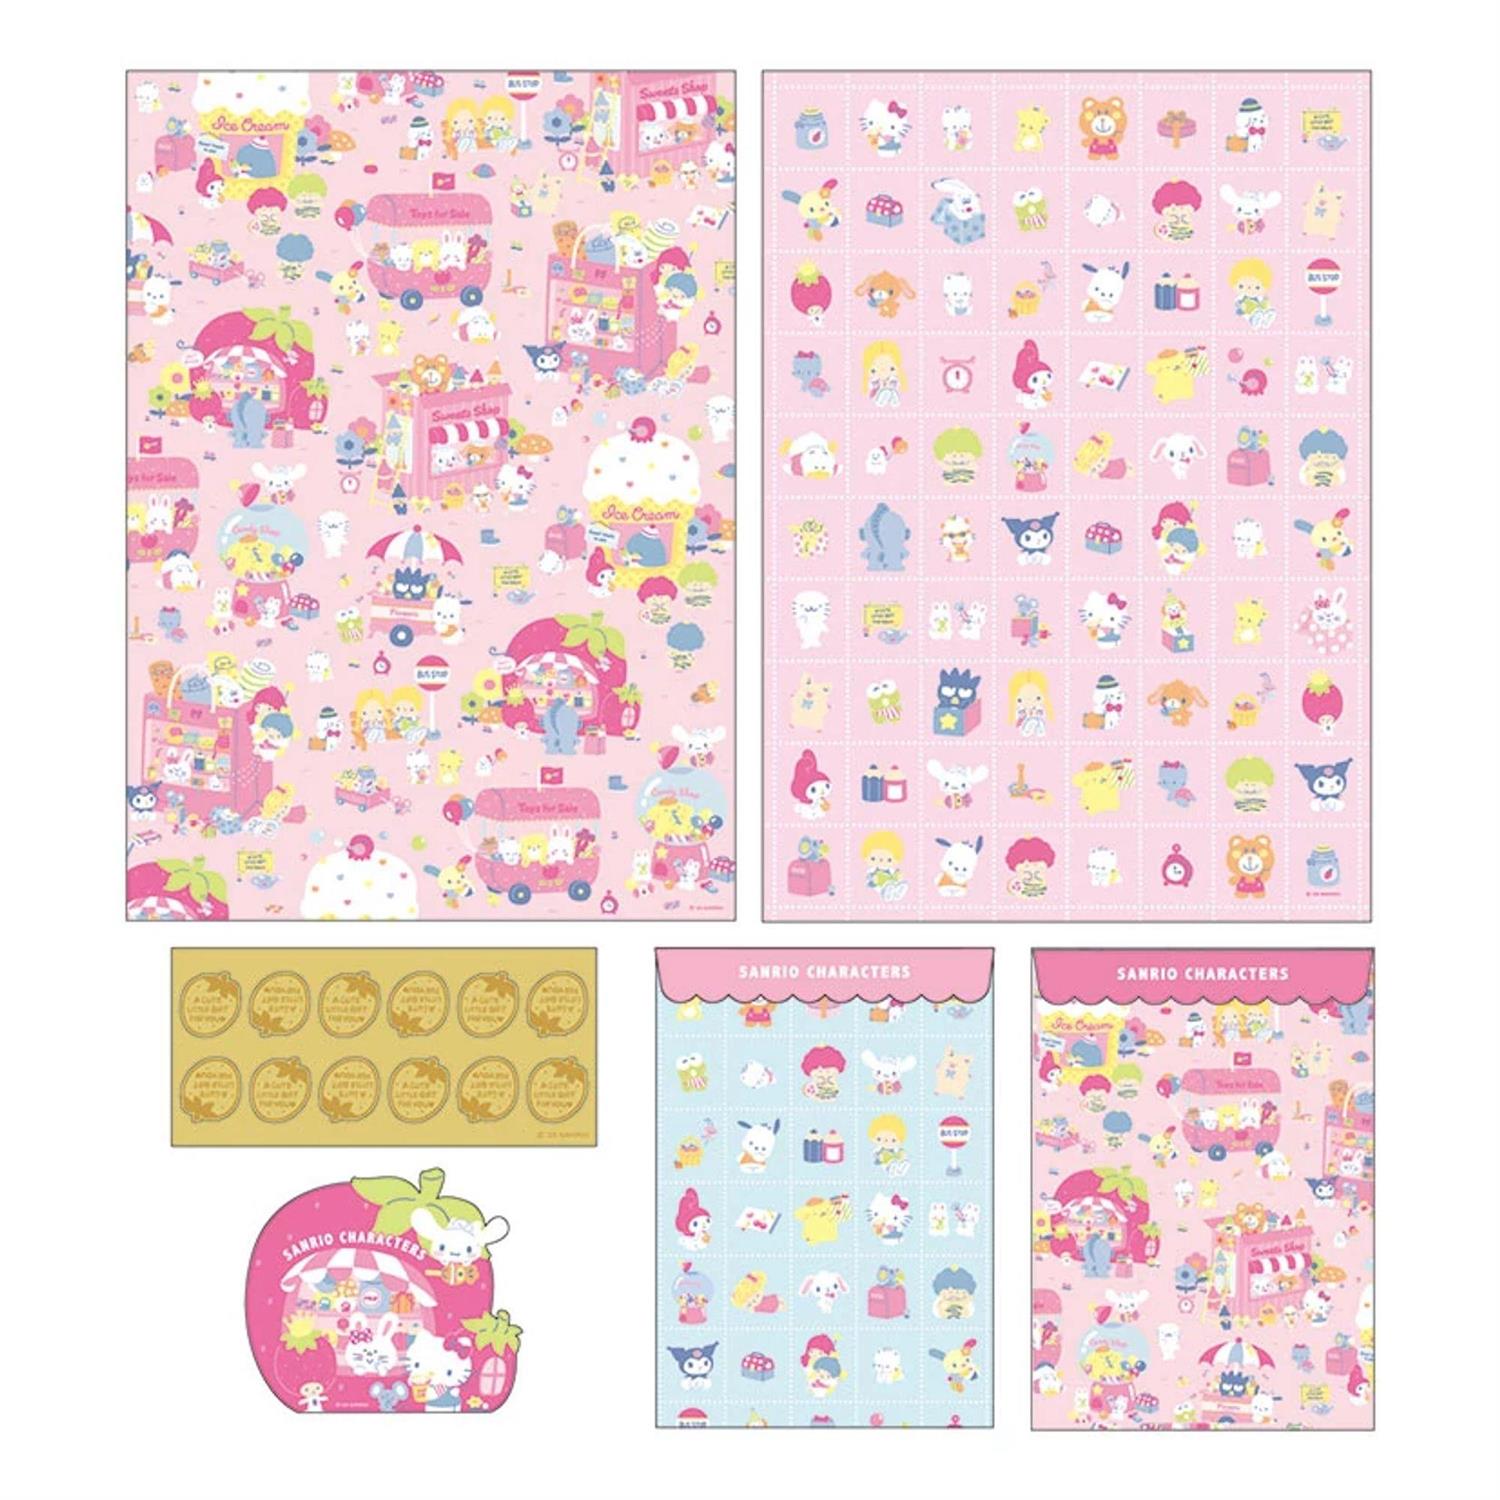 Sanrio Characters Fruit Stand Wrapping Set